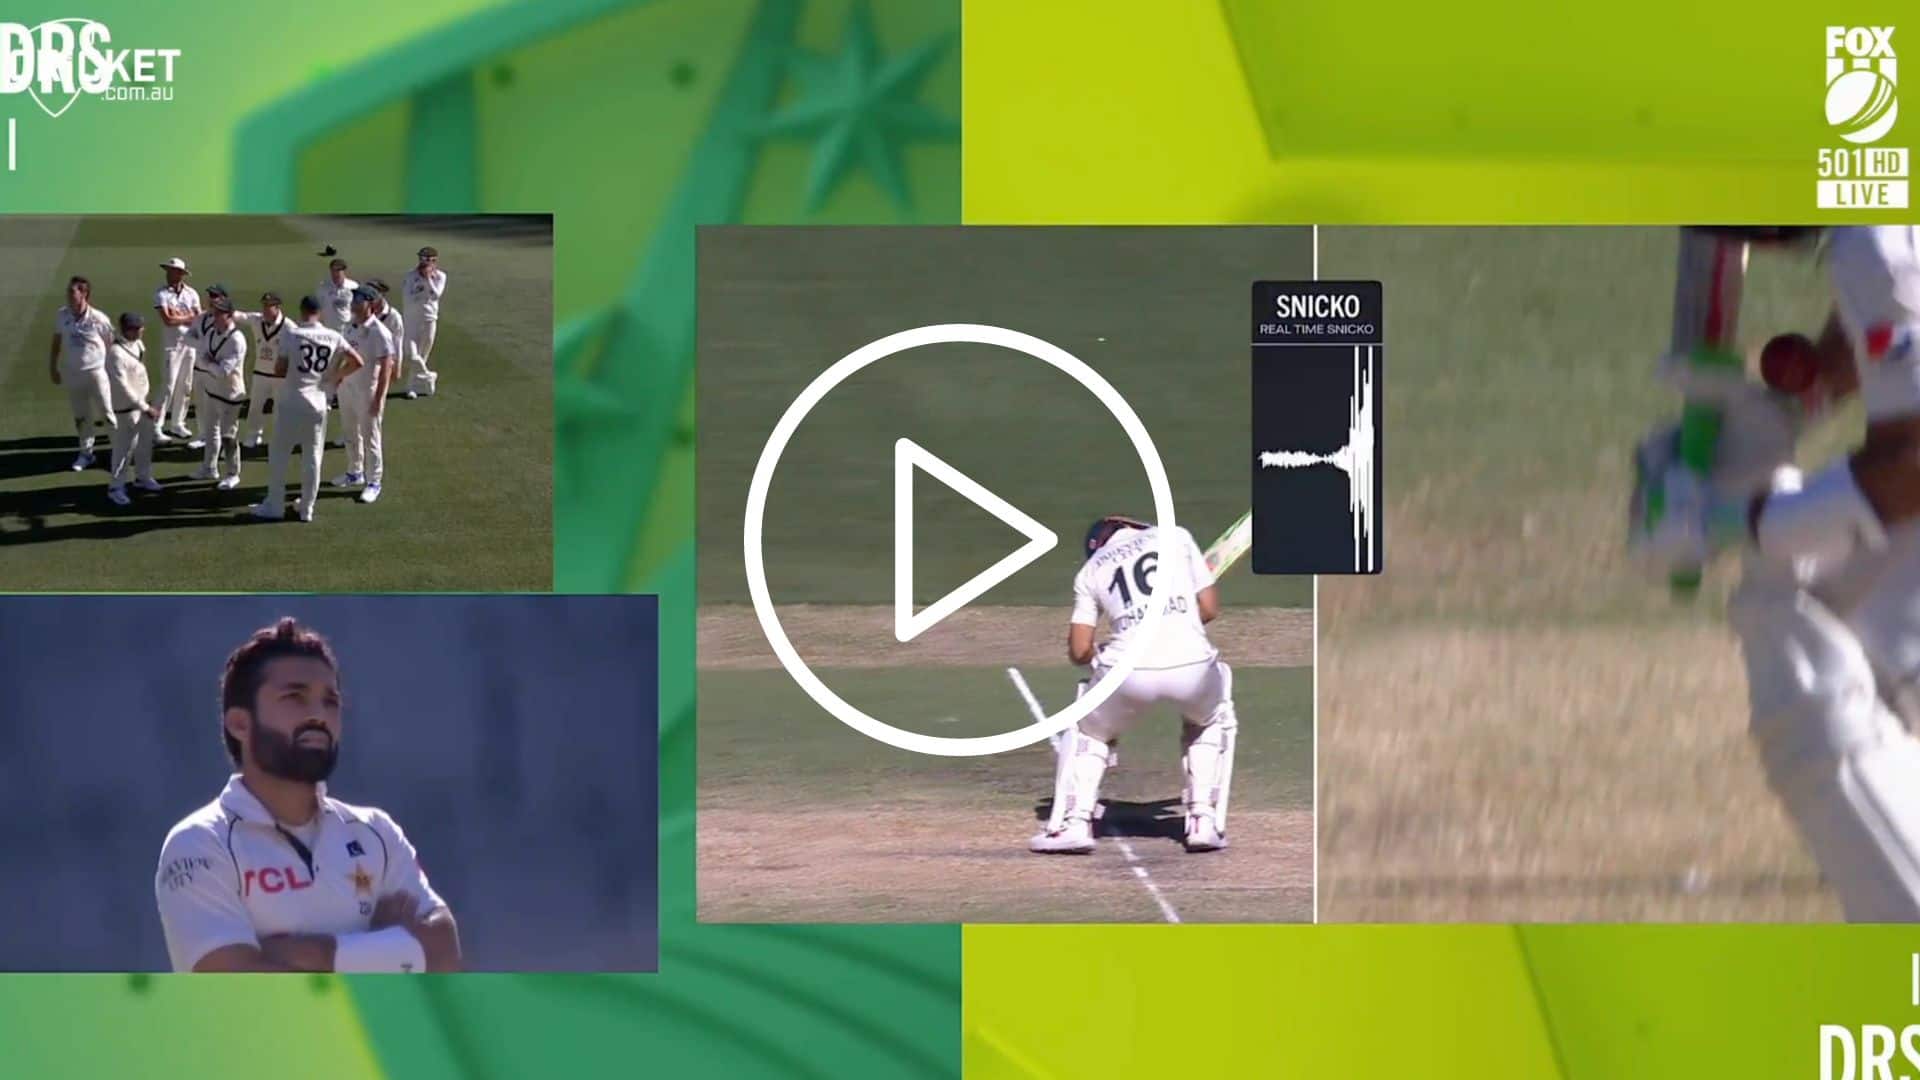 [Watch] Rizwan's Furious Reaction to Controversial Dismissal During AUS vs PAK 2nd Test